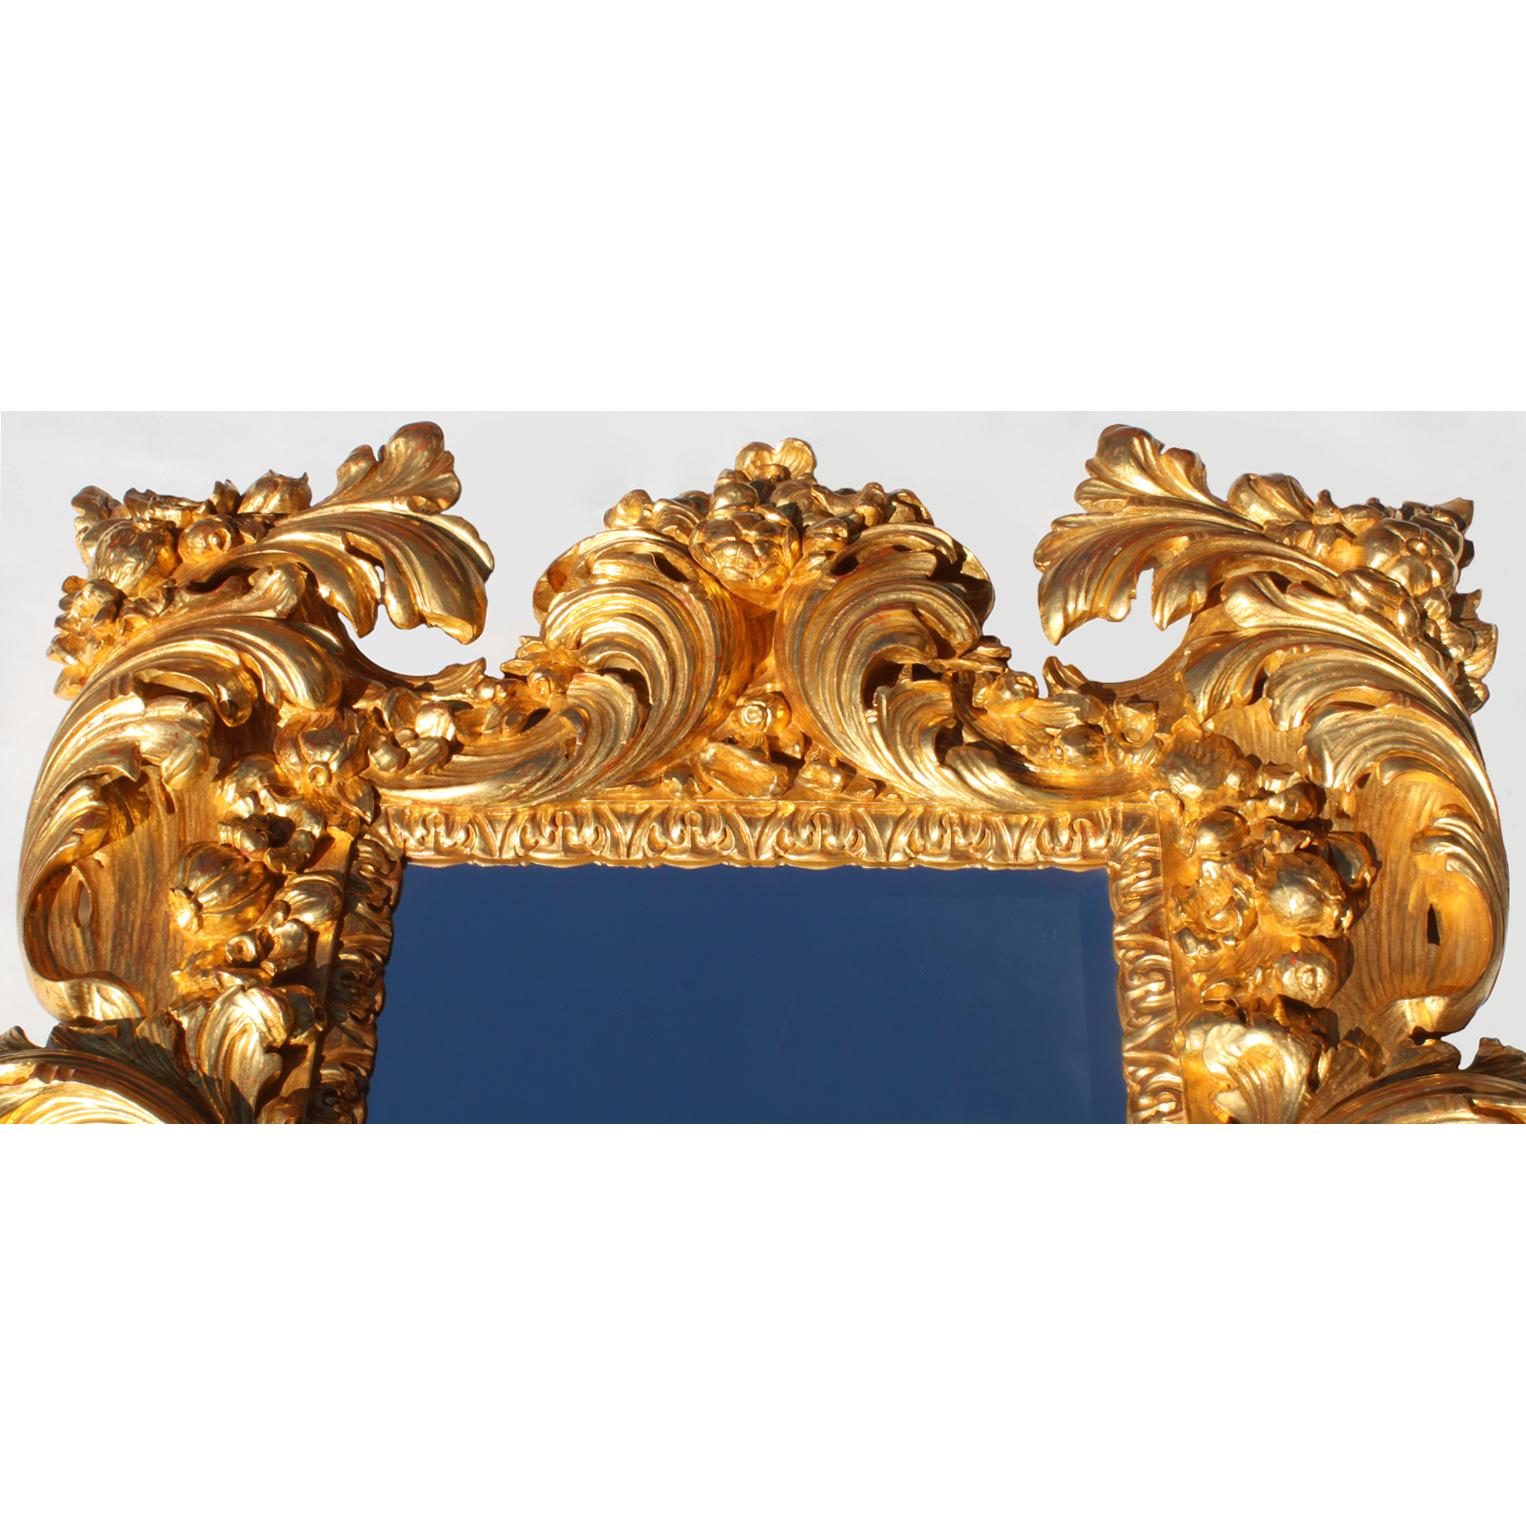 Baroque Revival Palatial Italian 19th Century Baroque Style Giltwood Carved Florentine Mirror For Sale